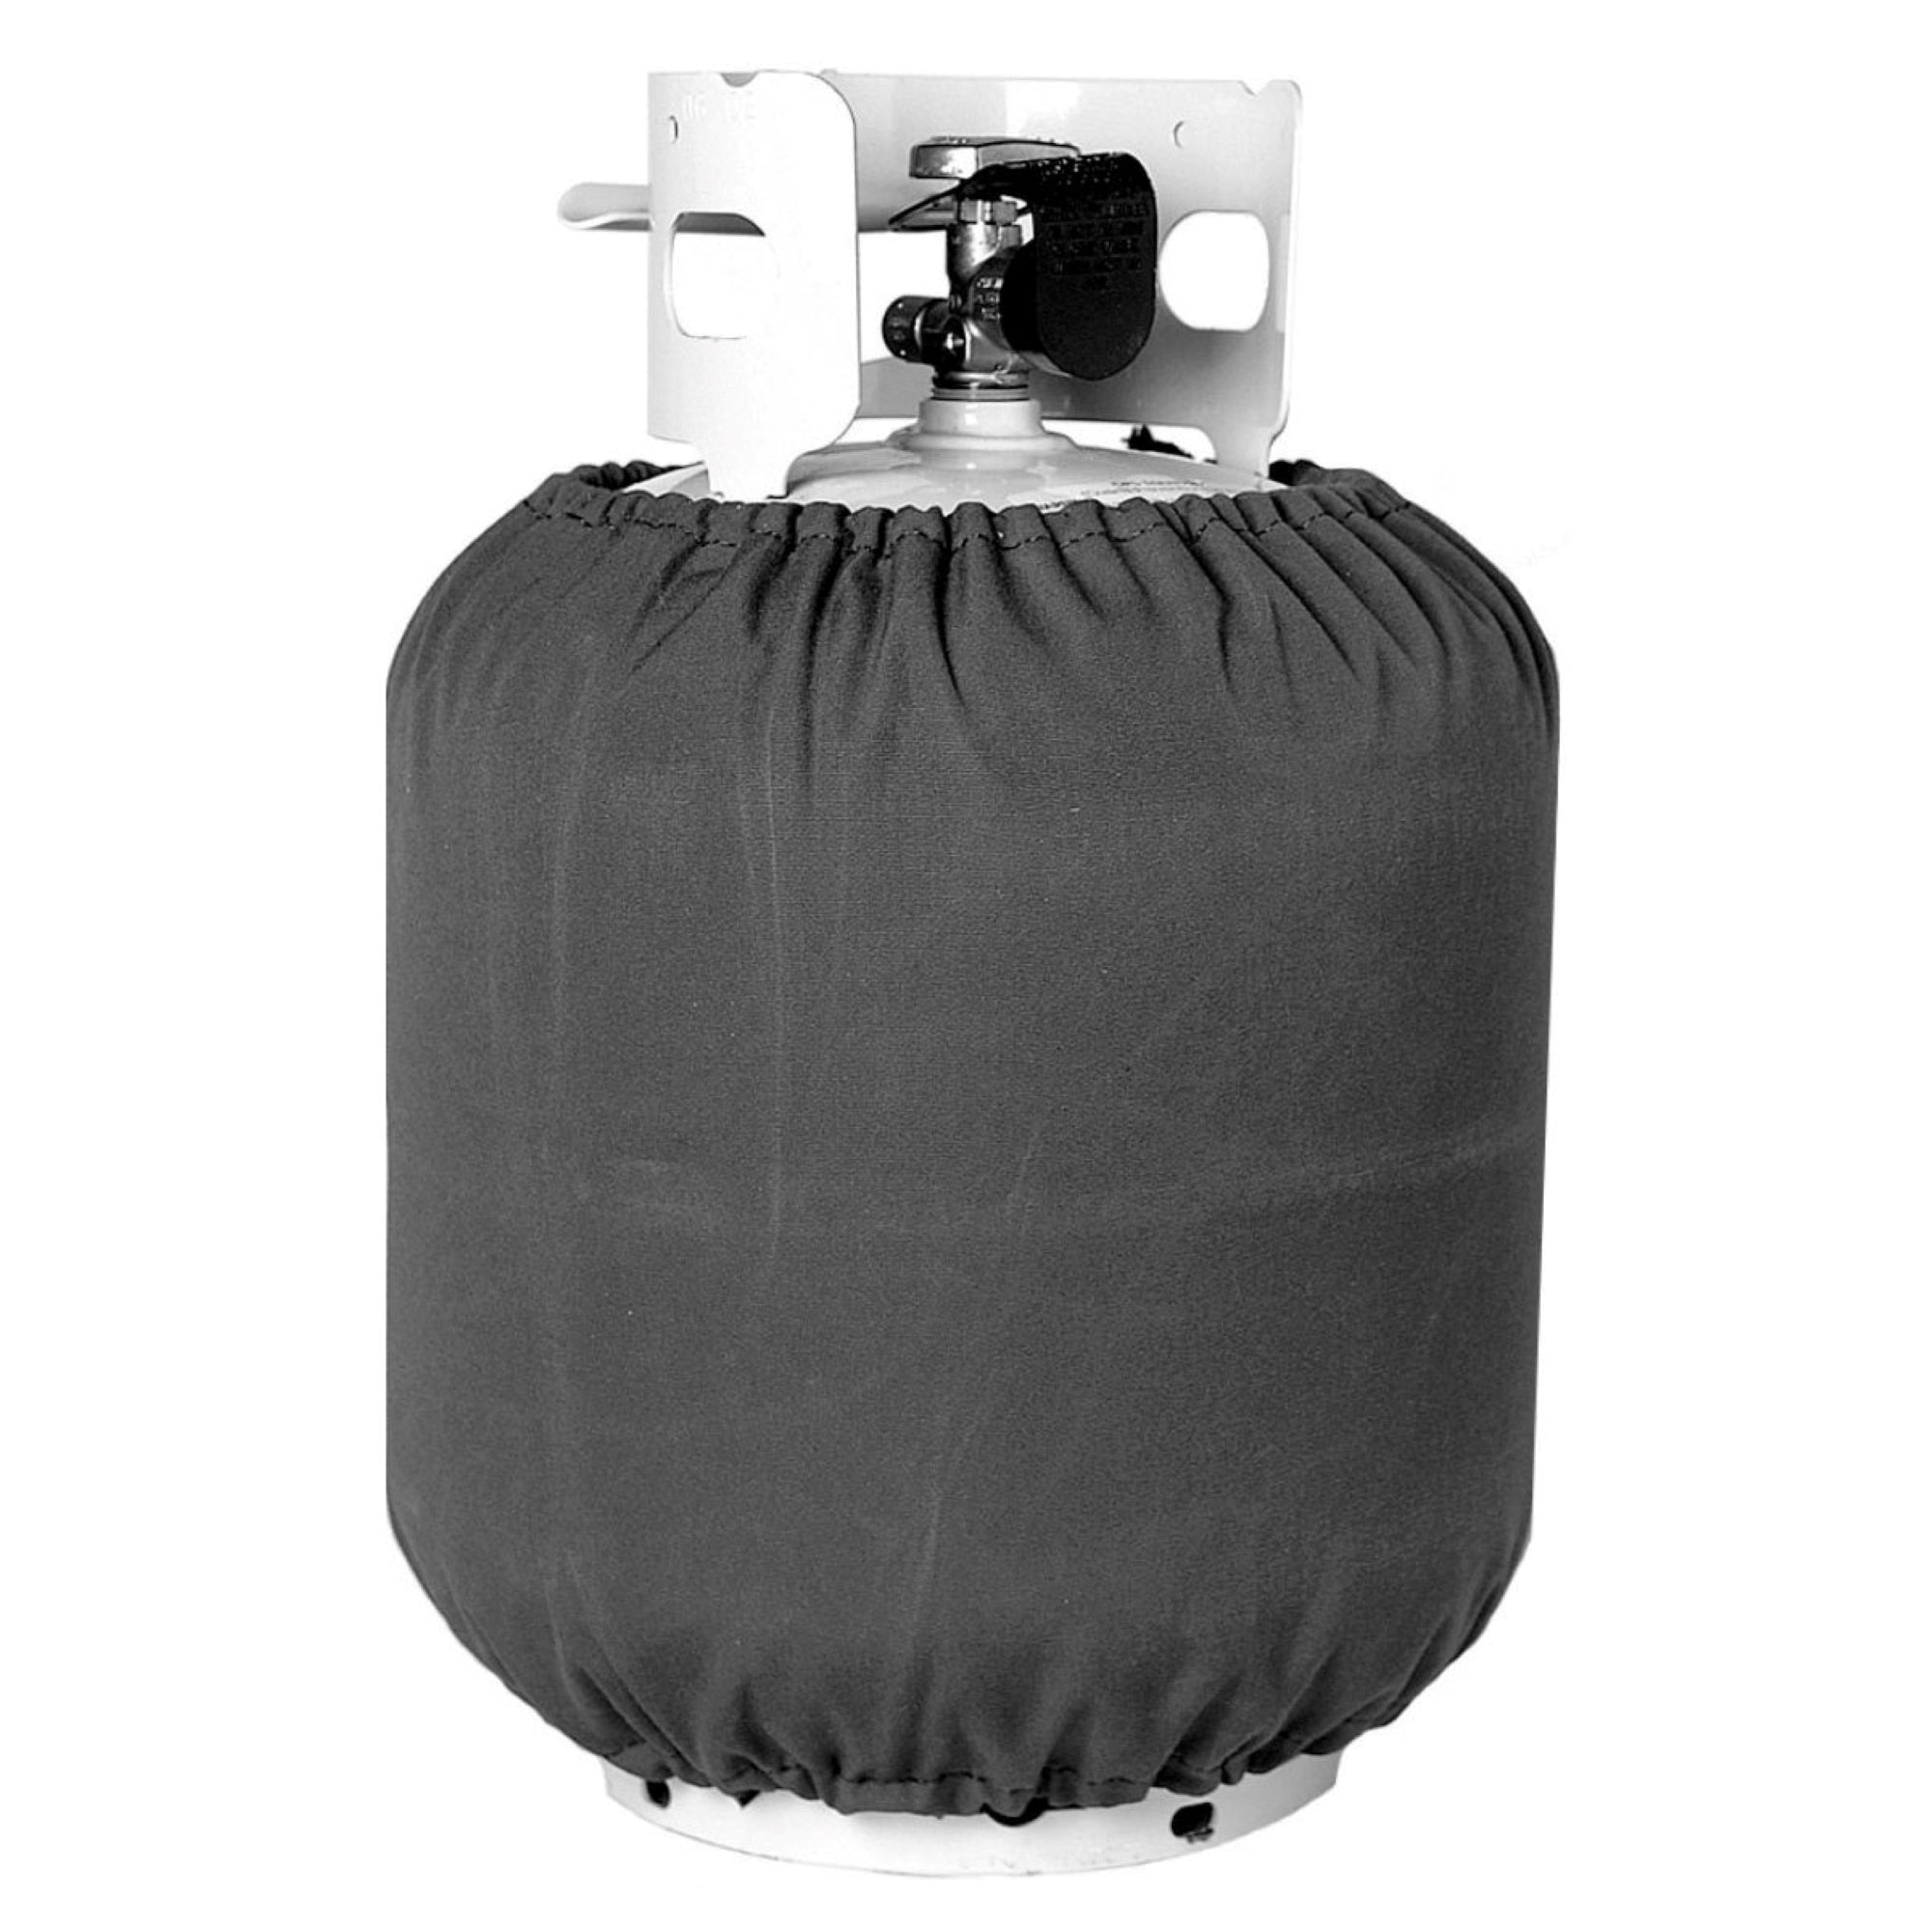 Product shot of Bite Shield universal fit propane tank cover on a white background